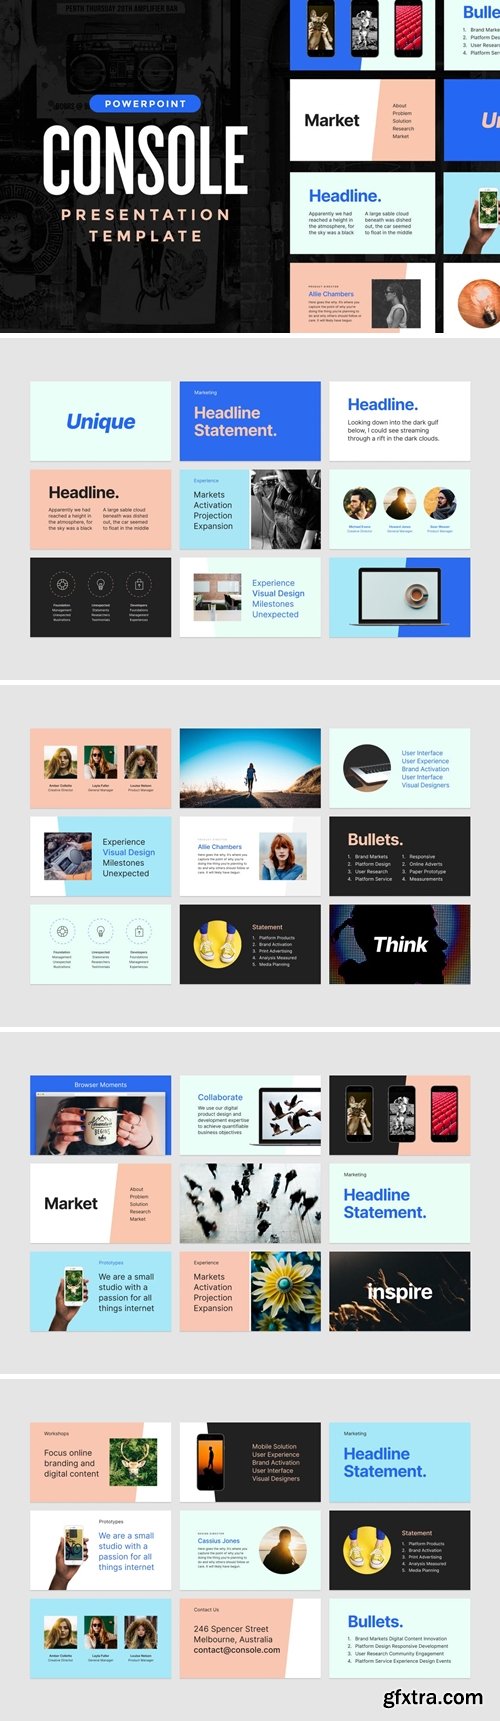 Console — Powerpoint Presentation Template